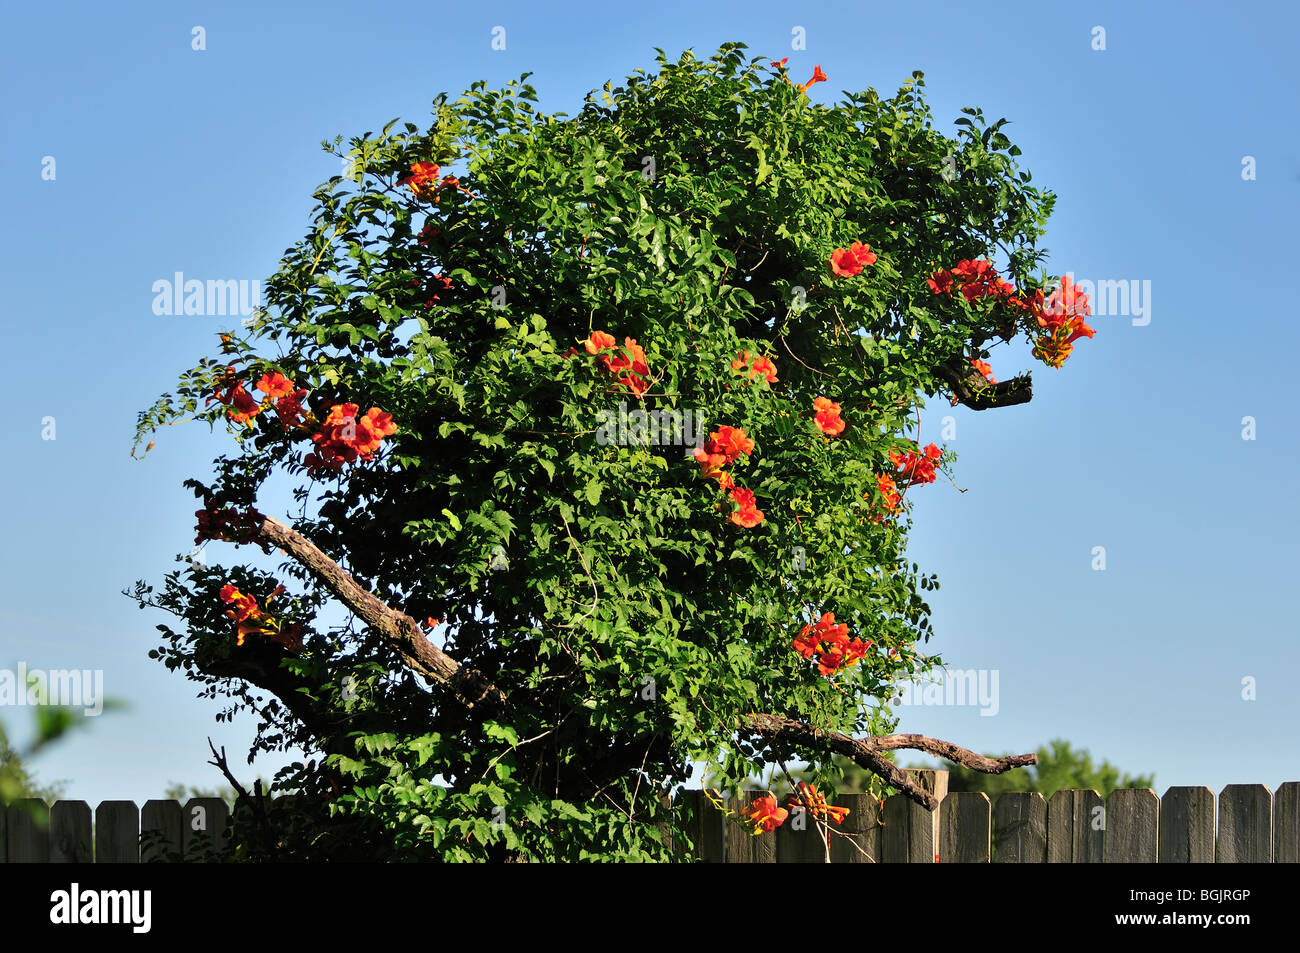 A blooming Trumpet Vine, Campsis radicans, grows on a dead peach tree. Shown against a blue sky. Oklahoma, USA Stock Photo